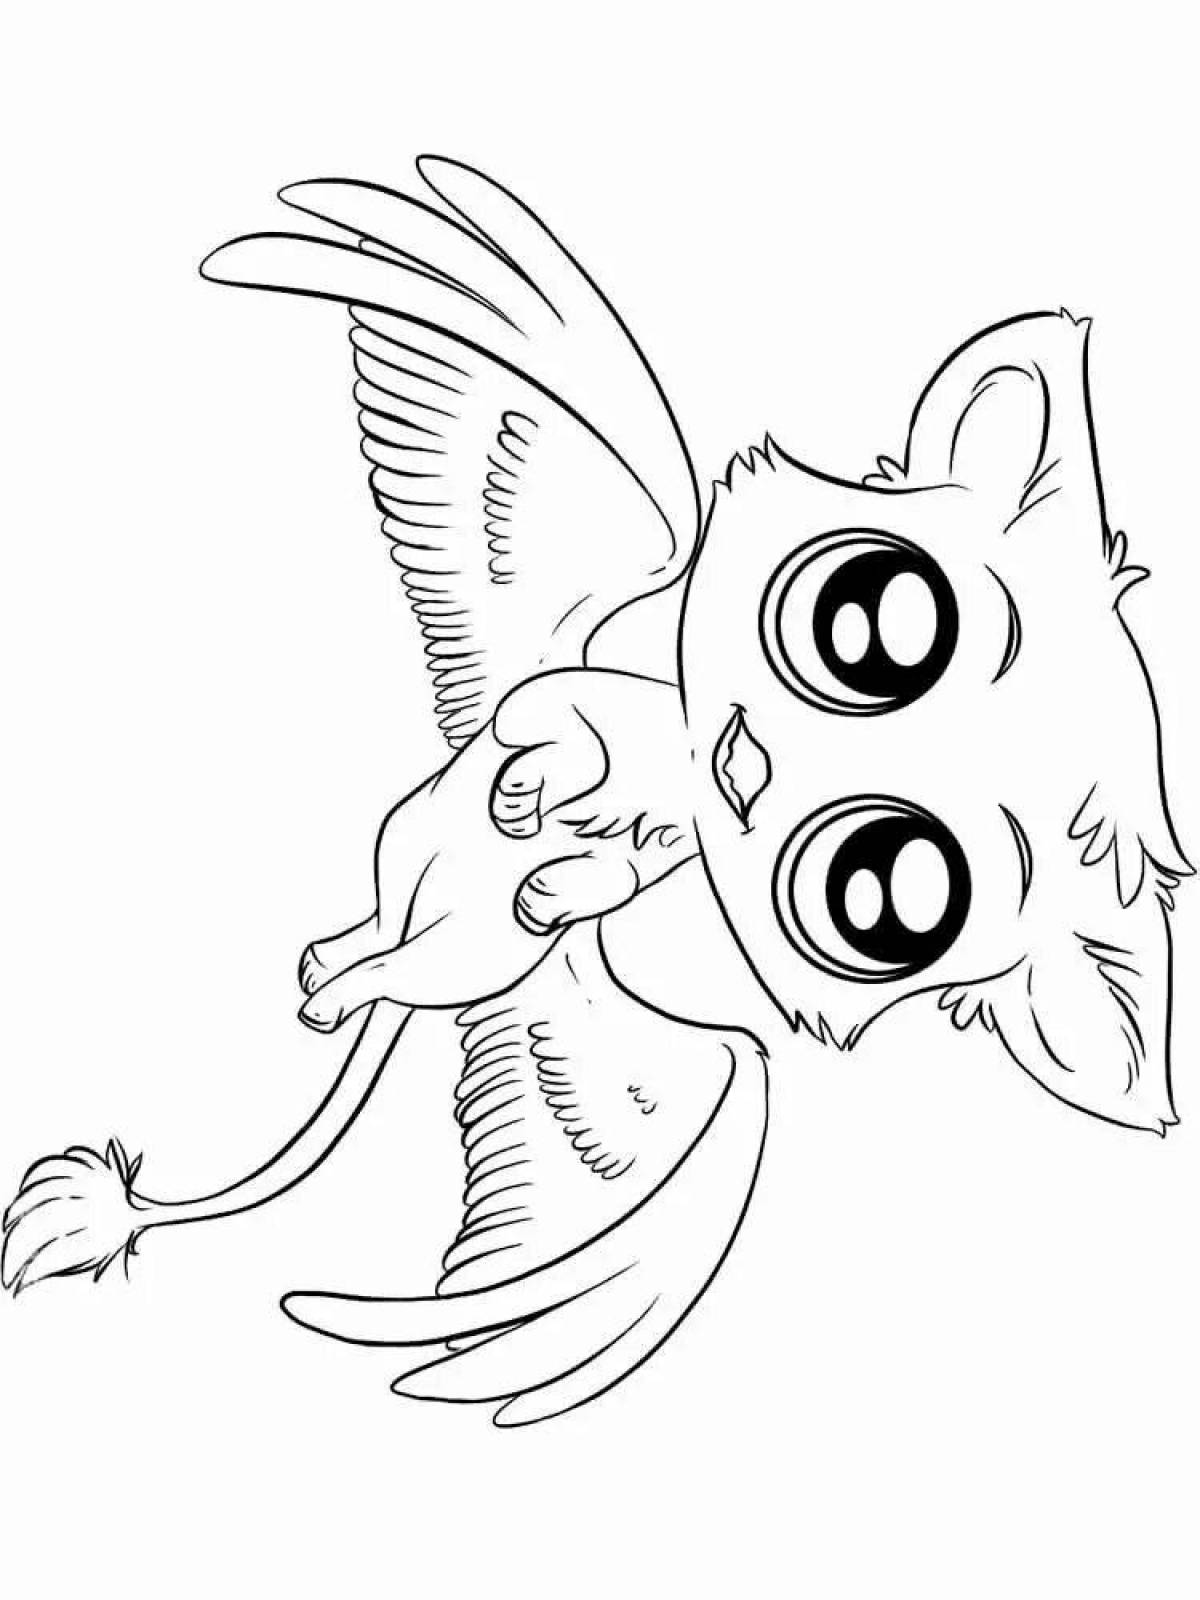 Supernatural coloring pages magical creatures